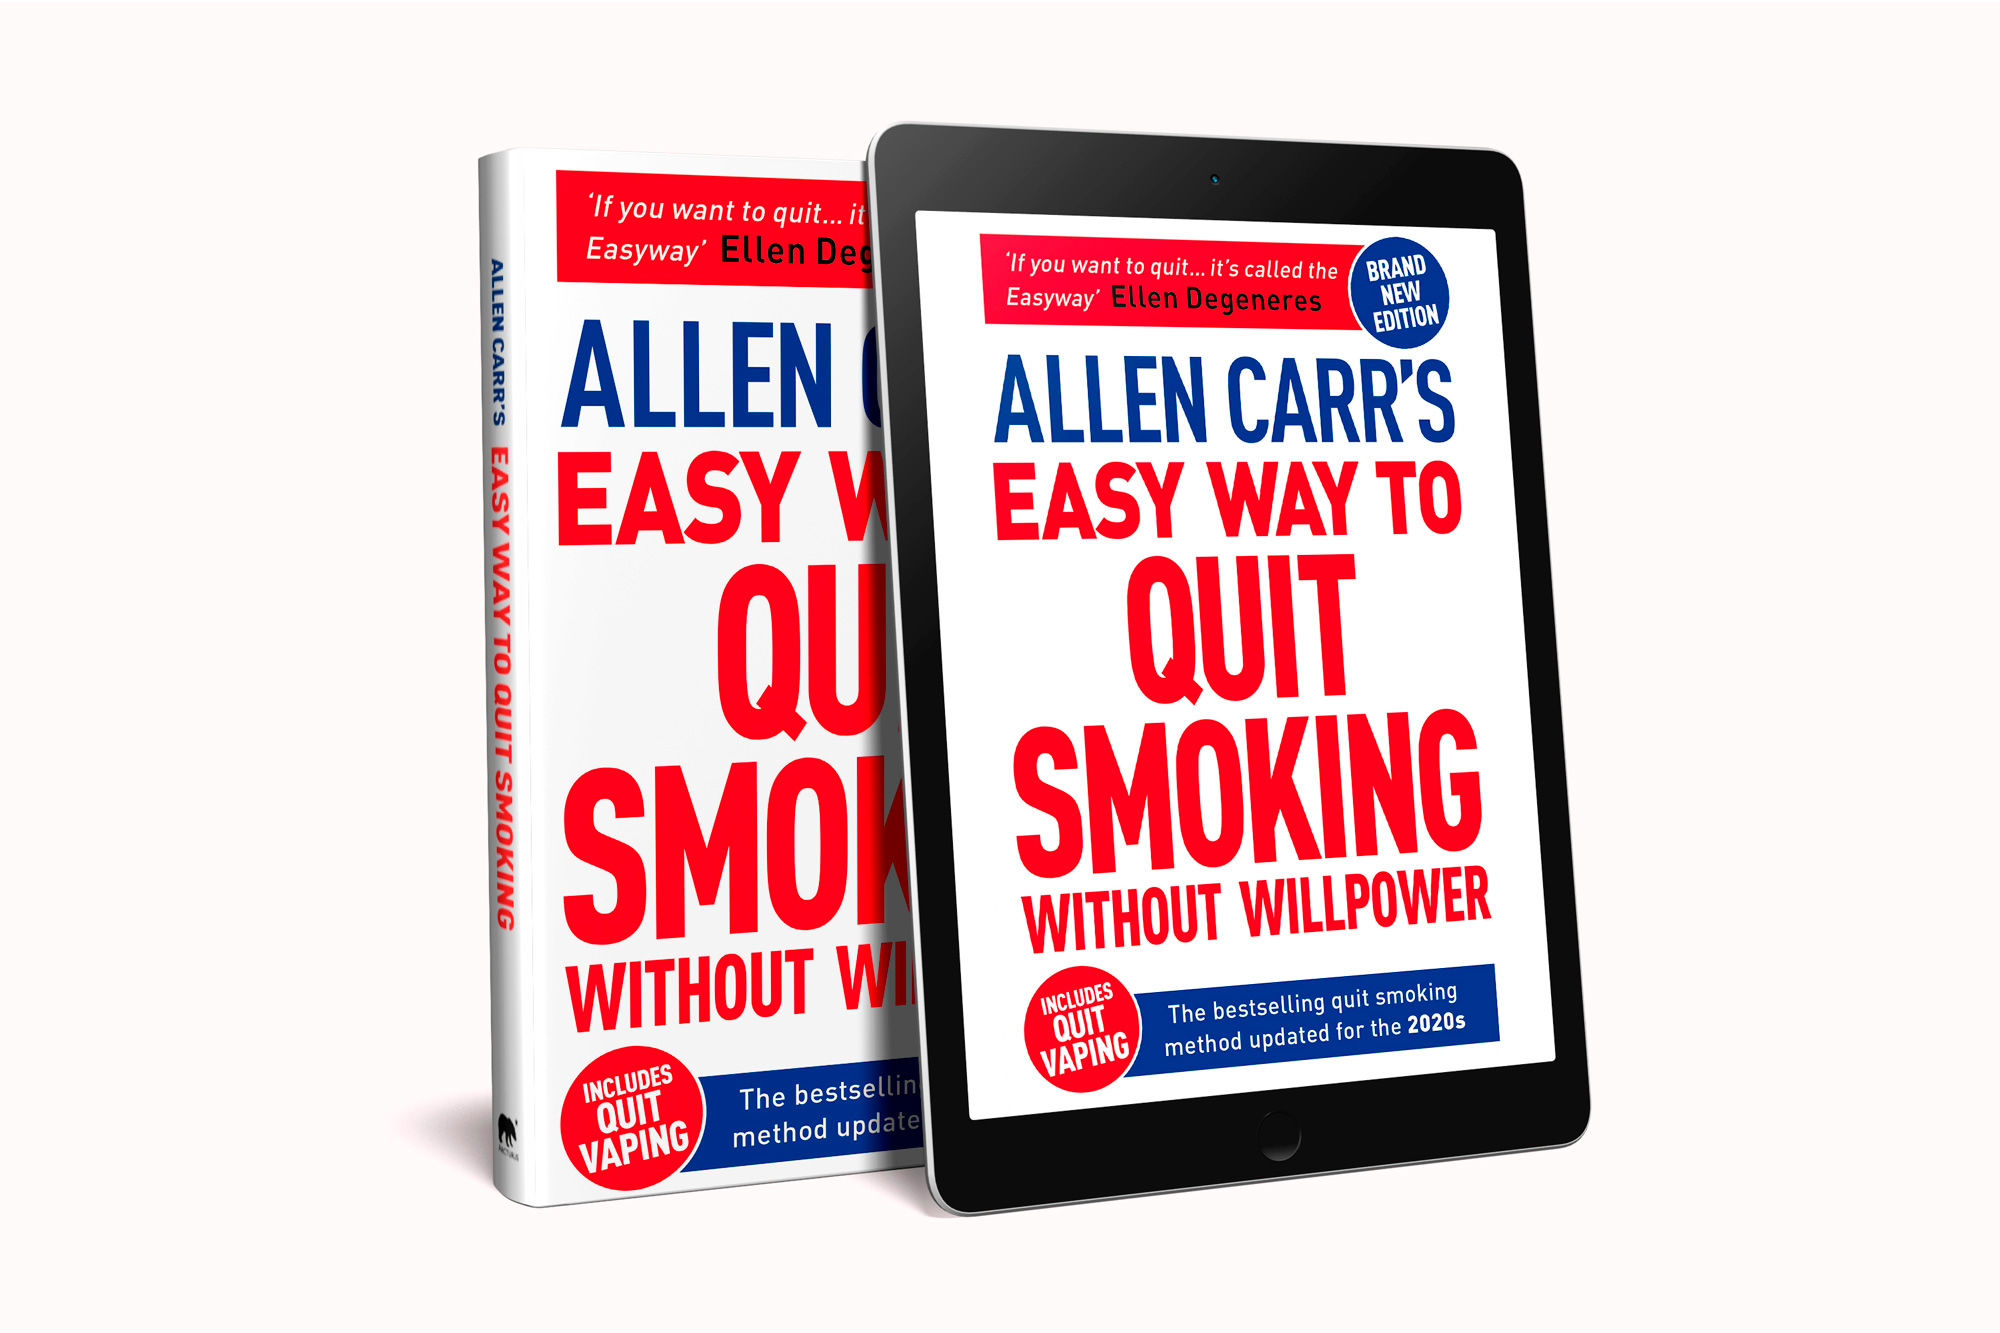 Easy Way to Quit Smoking Without Willpower